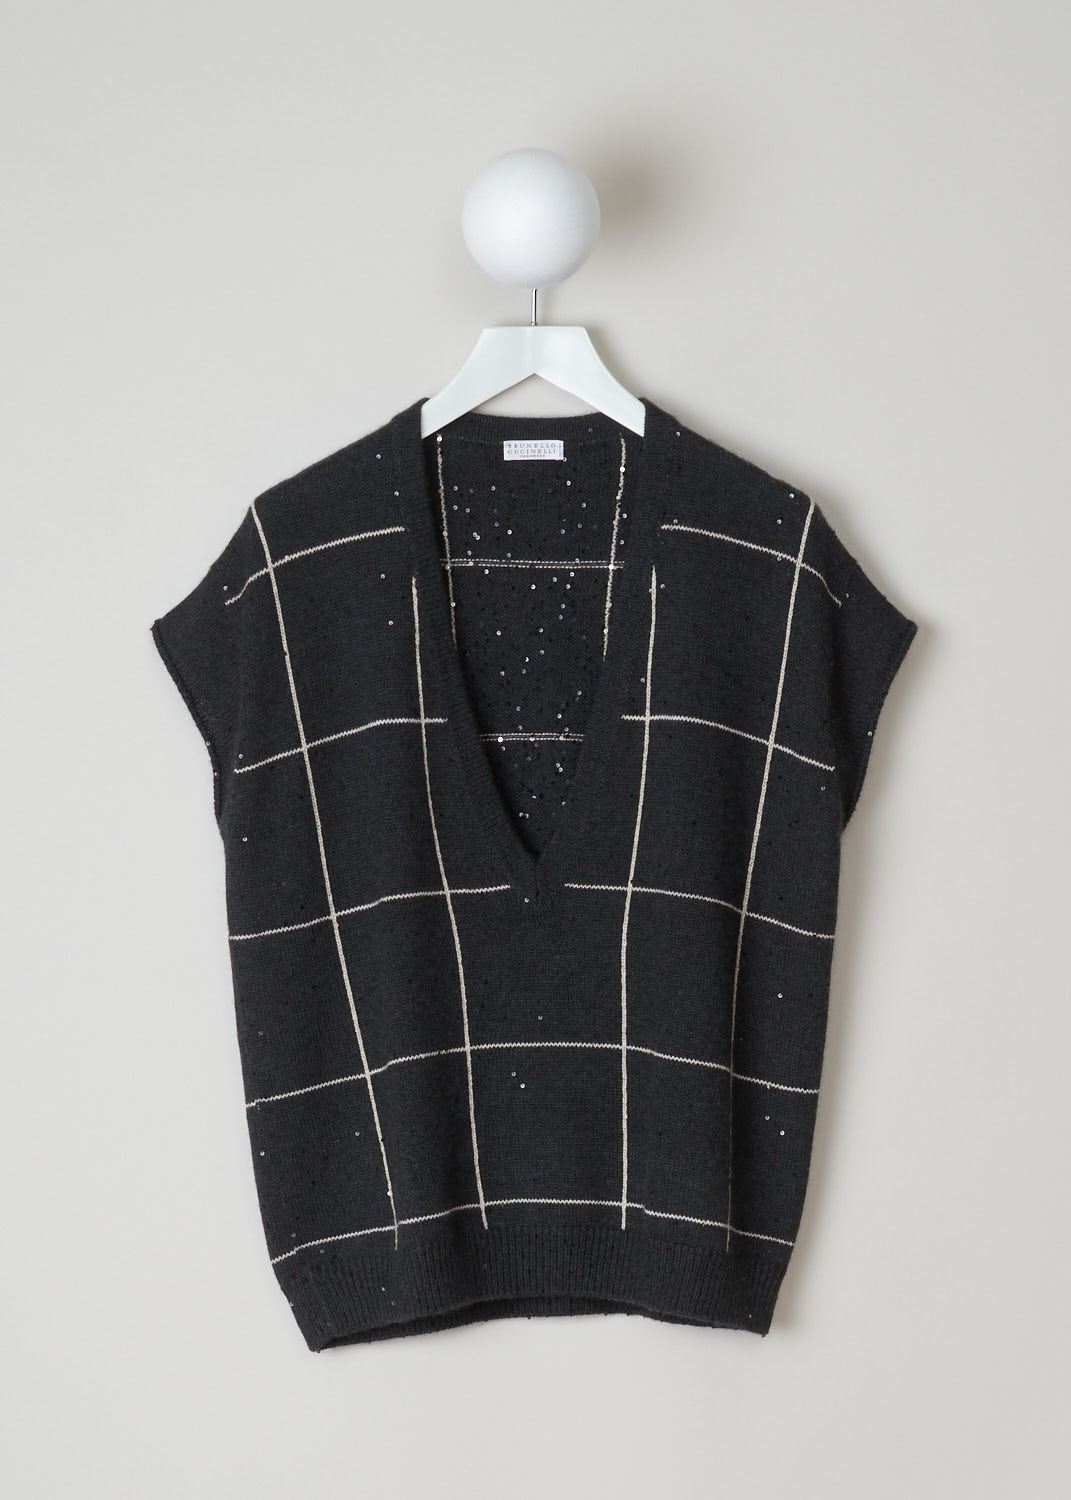 Brunello Cucinelli, charcoal checkered spencer, M73542302_CE420, black white, front, Made with a large check checkered pattern. This spencer has an oversized fit. Featuring a deep v-neckline and charcoal coloured sequins only visible when the light hits them.